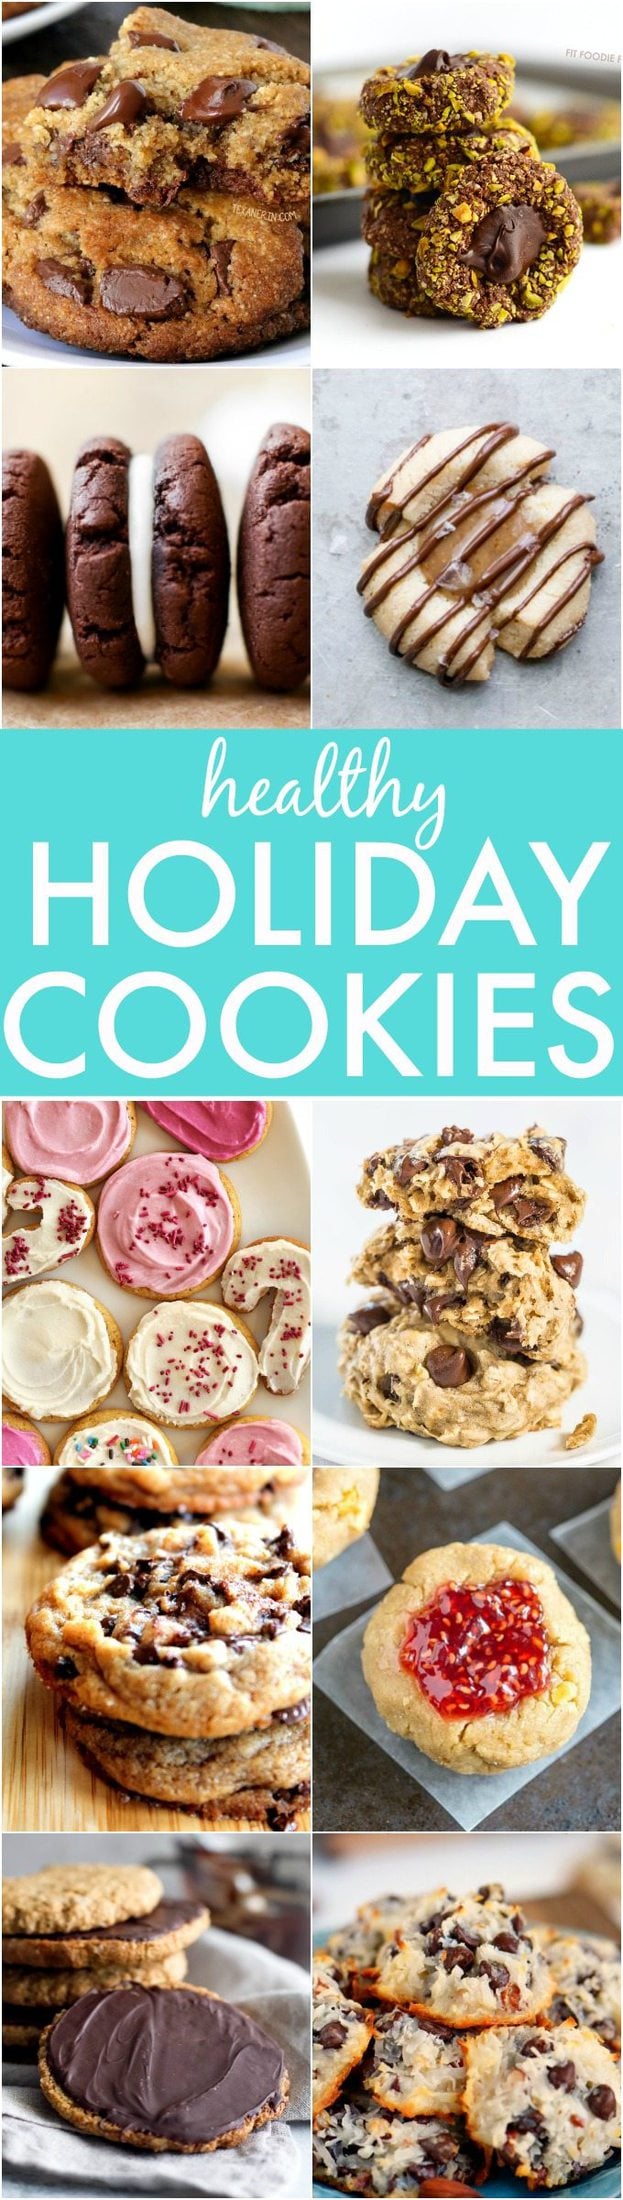 Clean Eating Holiday Cookies (V, GF, Paleo options)- The BEST Clean Eating and Healthy Holiday Cookies perfect for Christmas, the festive season, gifts and more- Flourless, no bake and sugar free options! {vegan, gluten free, paleo recipe options}- thebigmansworld.com